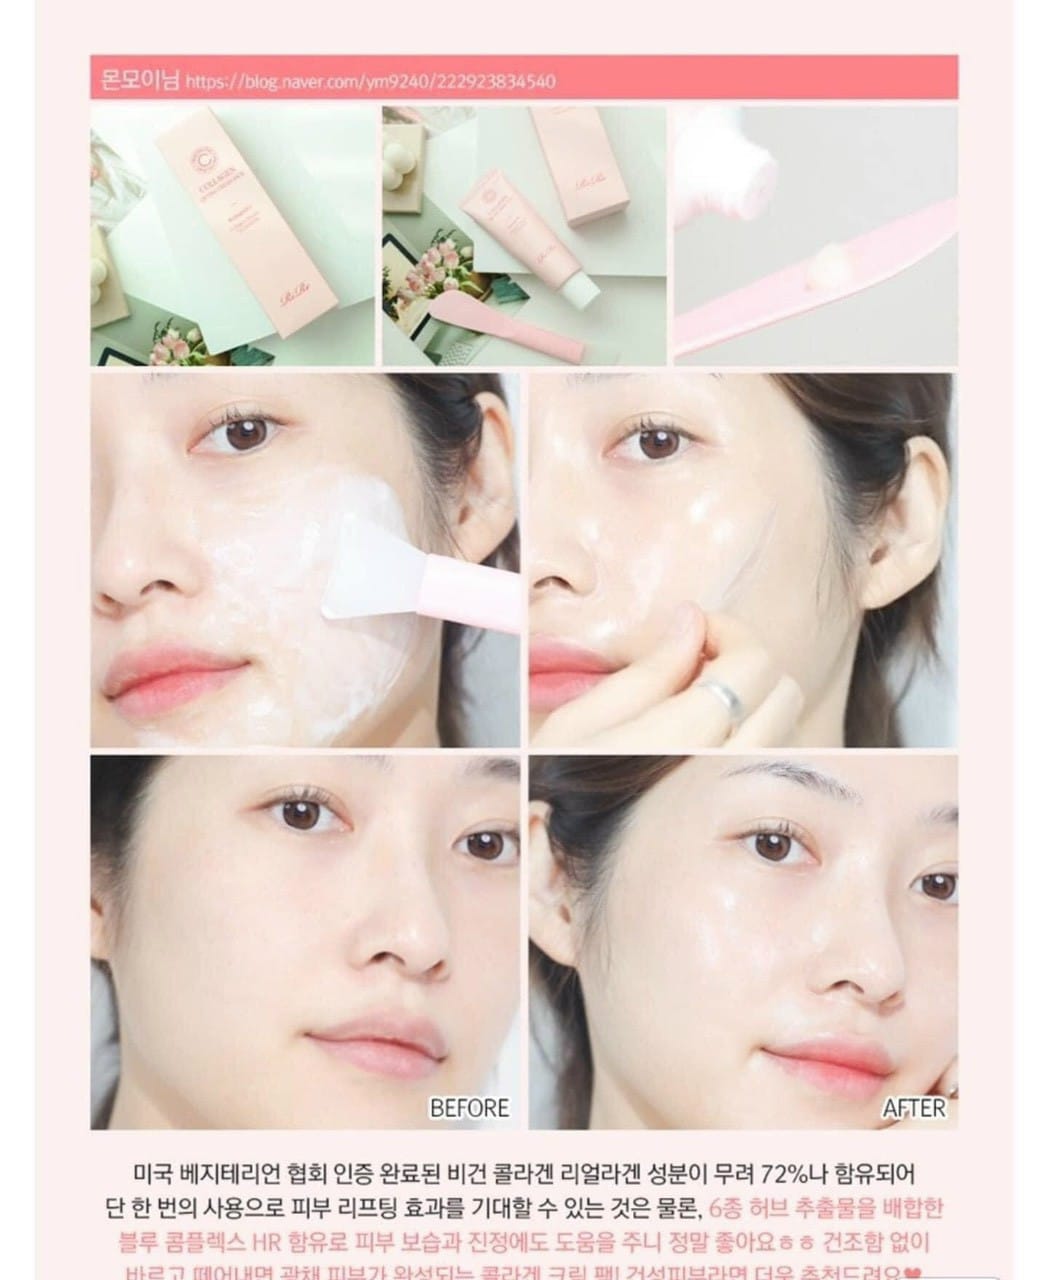 RIRE Collagen Lifting Cream Pack